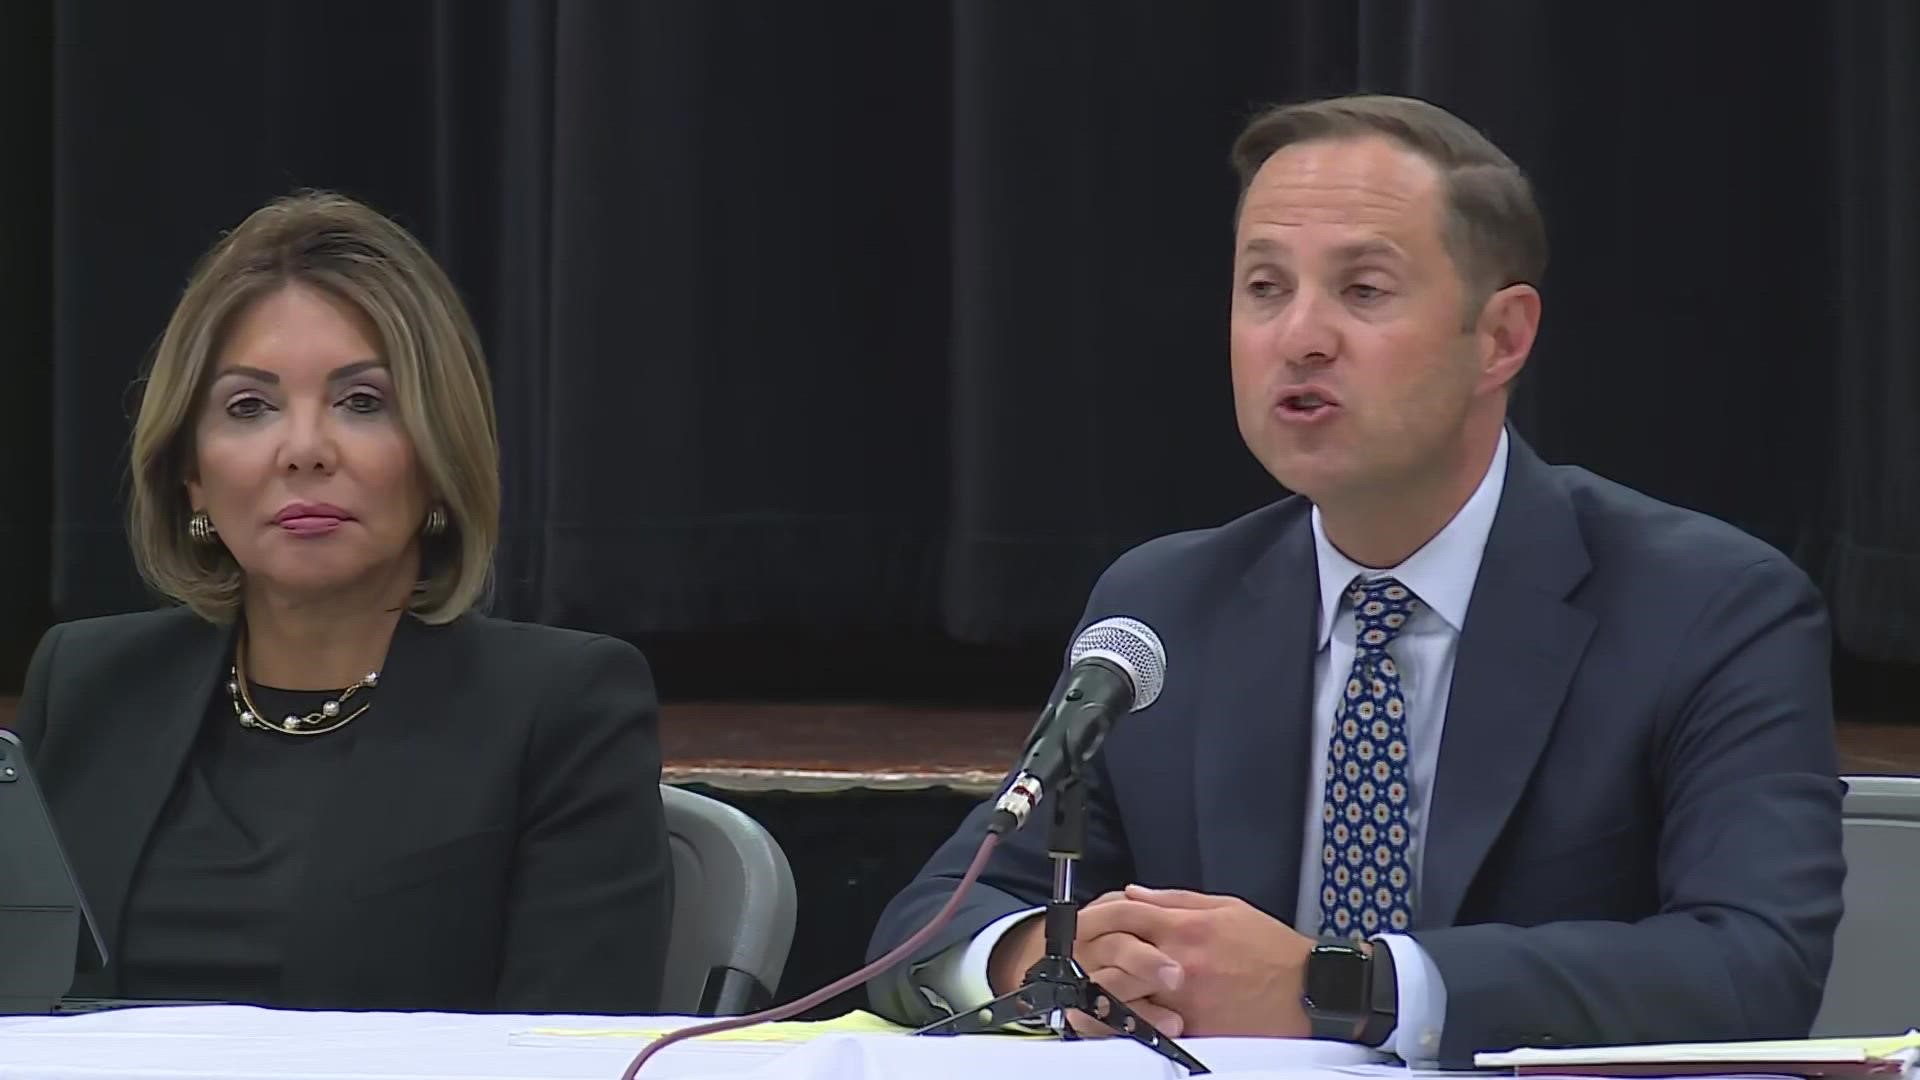 State Rep. Dustin Burrows said at a press conference that some police believed the shooter was in negotiations when they arrived at Robb Elementary.